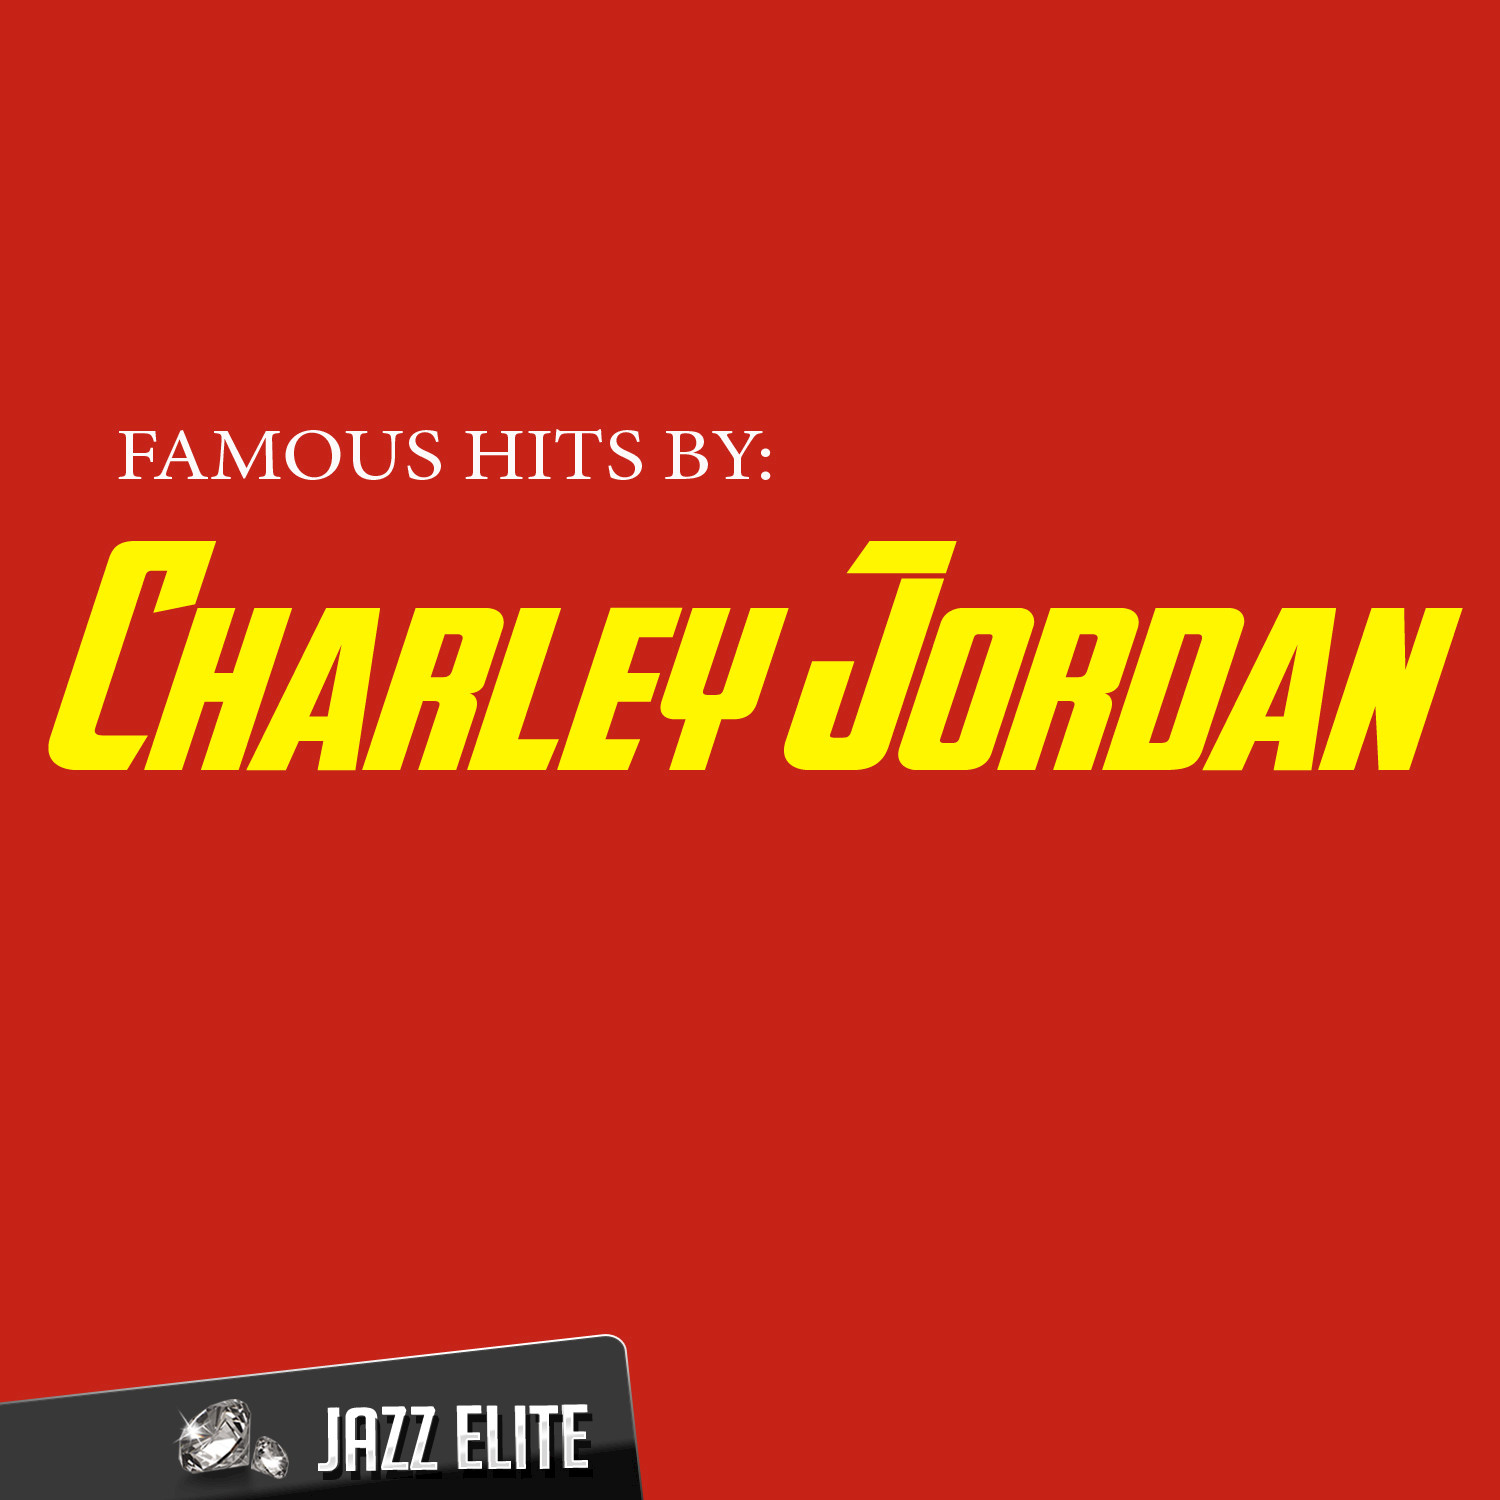 Famous Hits by Charley Jordan